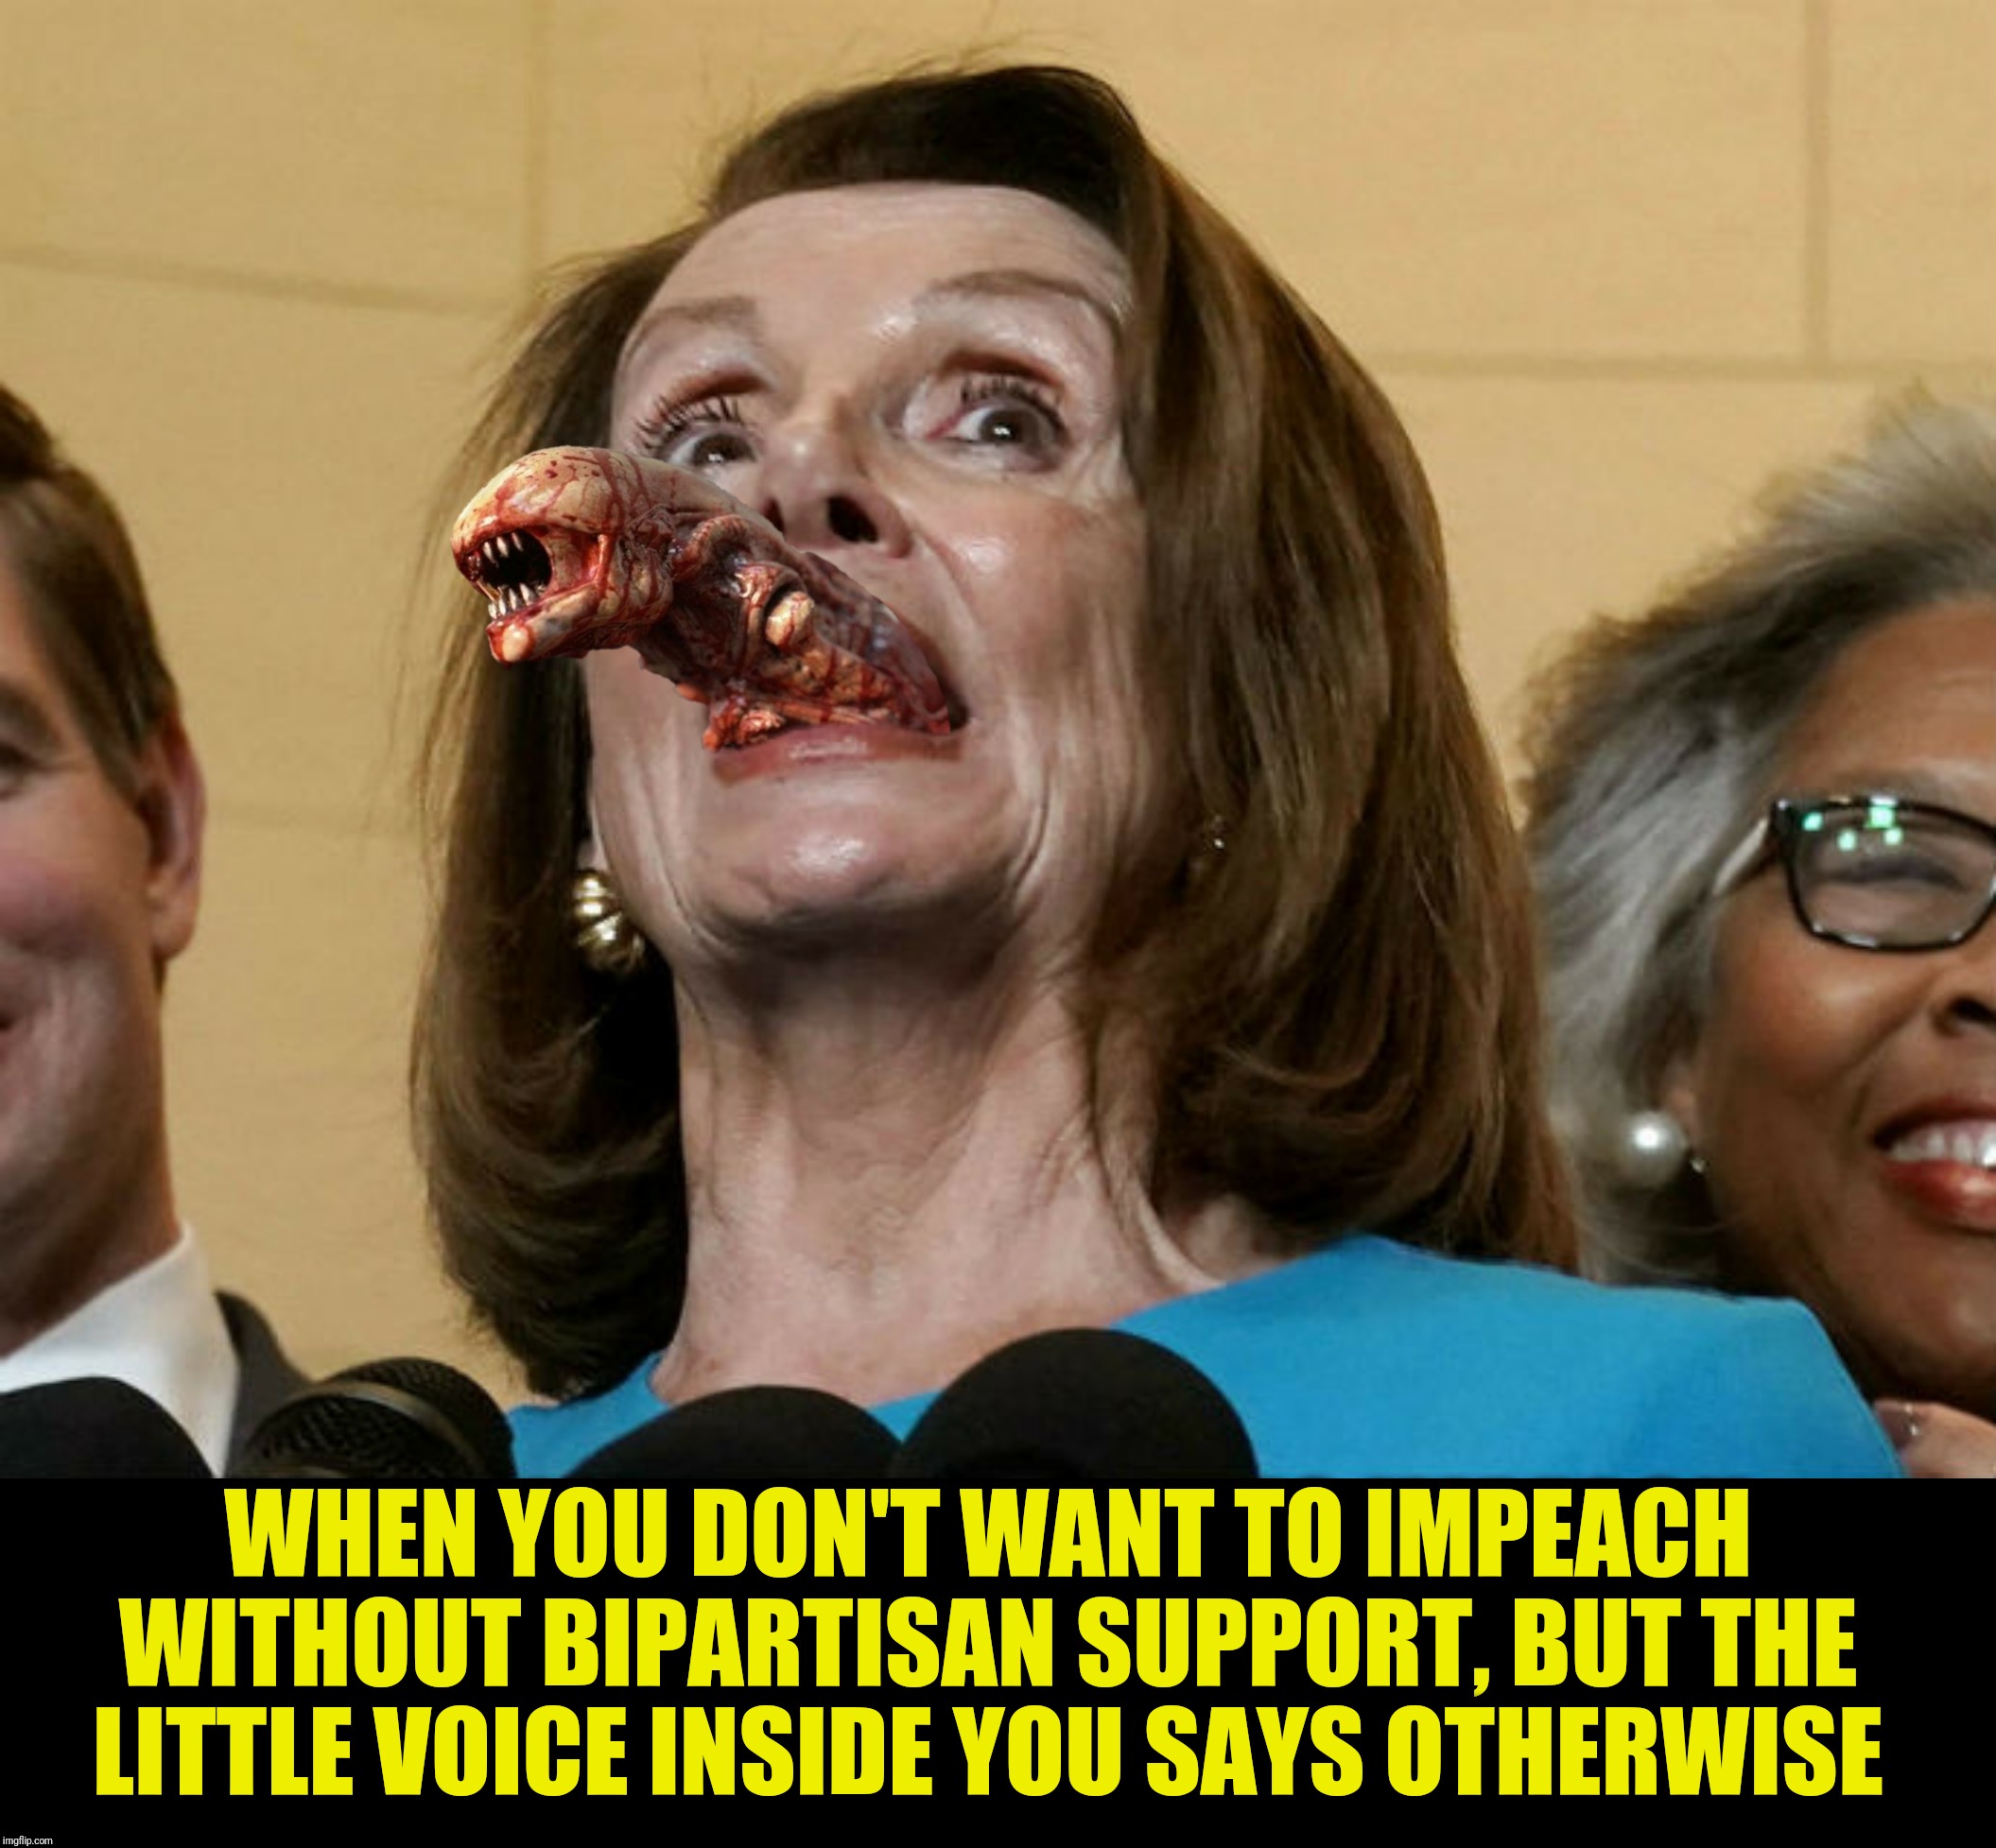 In Congress everyone can hear you scream |  WHEN YOU DON'T WANT TO IMPEACH WITHOUT BIPARTISAN SUPPORT, BUT THE LITTLE VOICE INSIDE YOU SAYS OTHERWISE | image tagged in bad photoshop,alien,nancy pelosi,in space no one can hear you scream | made w/ Imgflip meme maker